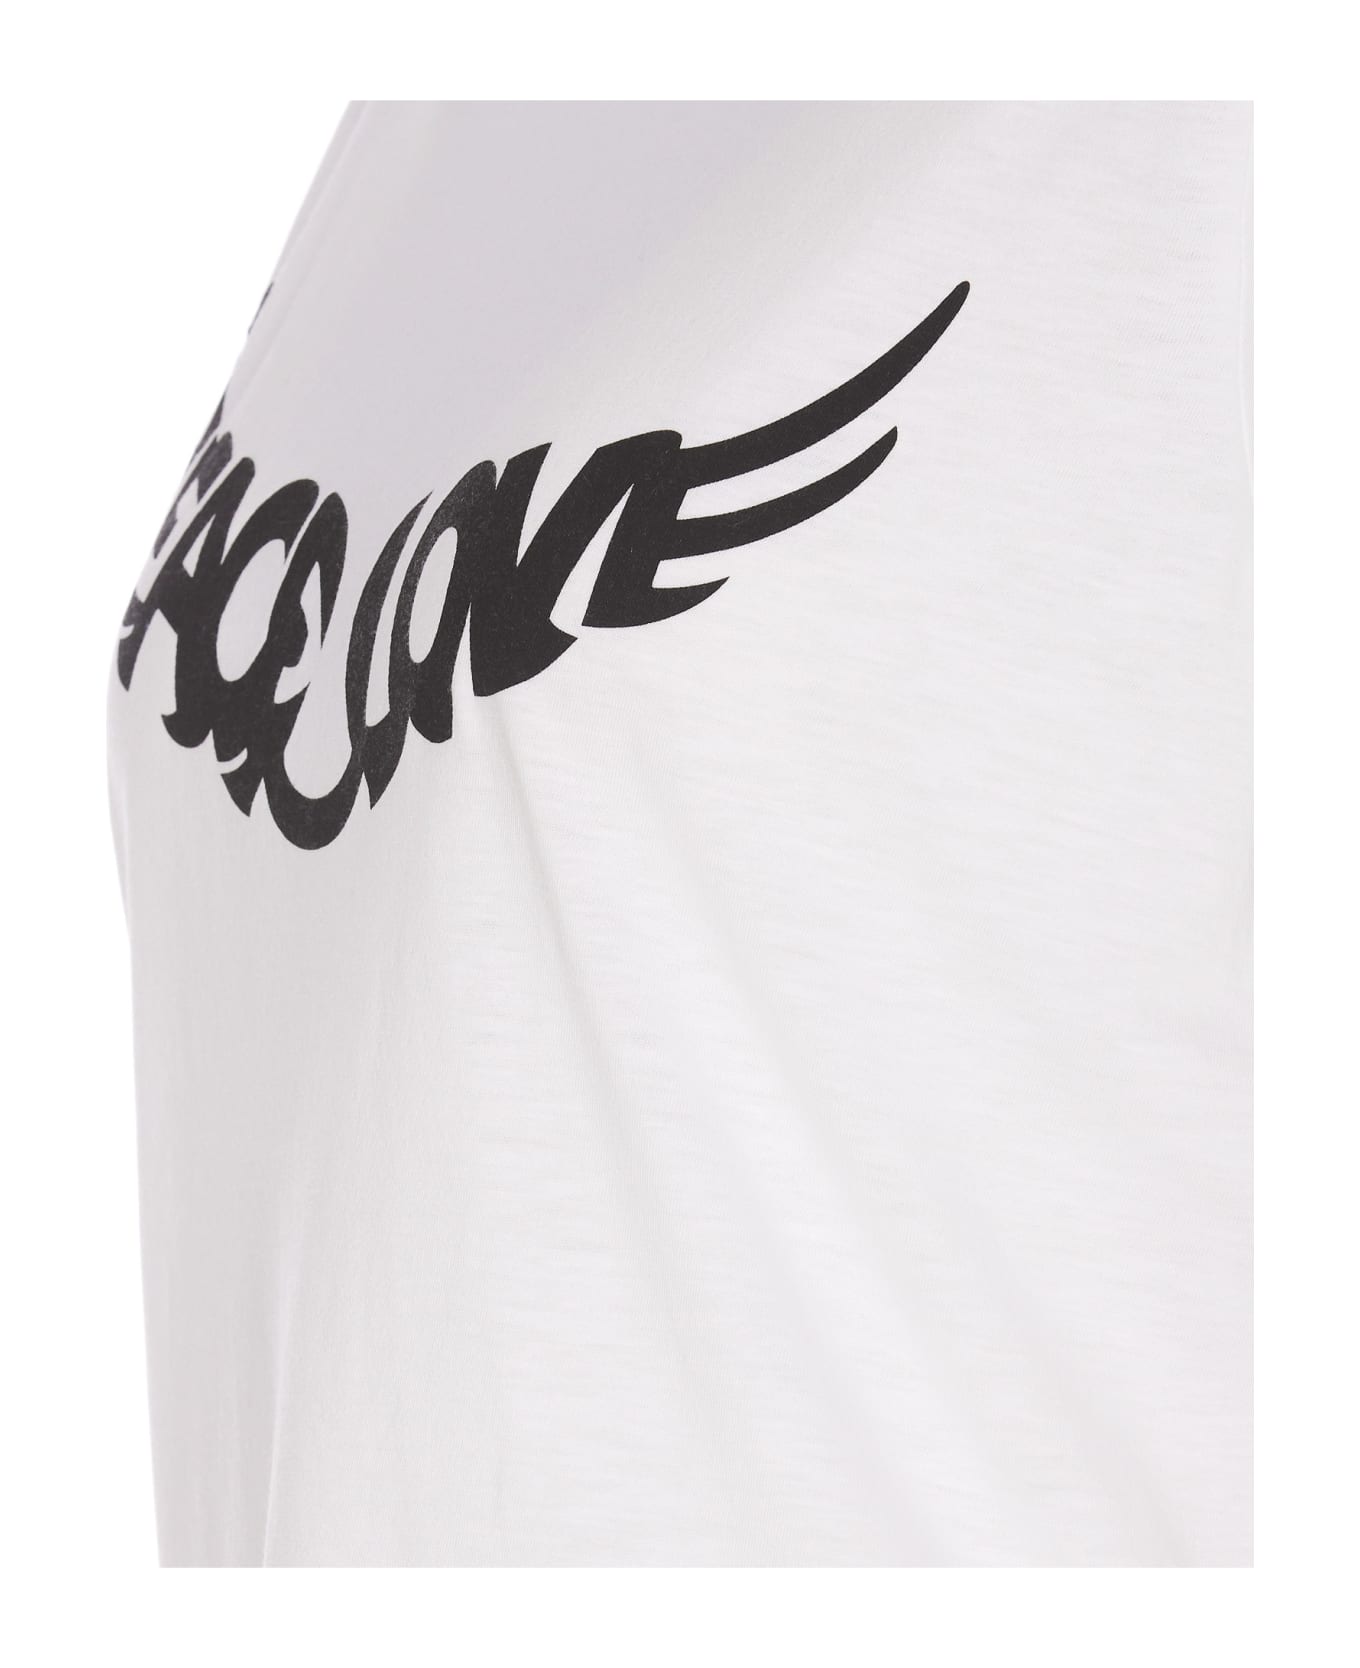 Zadig & Voltaire Woop Peace Love Wings T-shirt - White Tシャツ